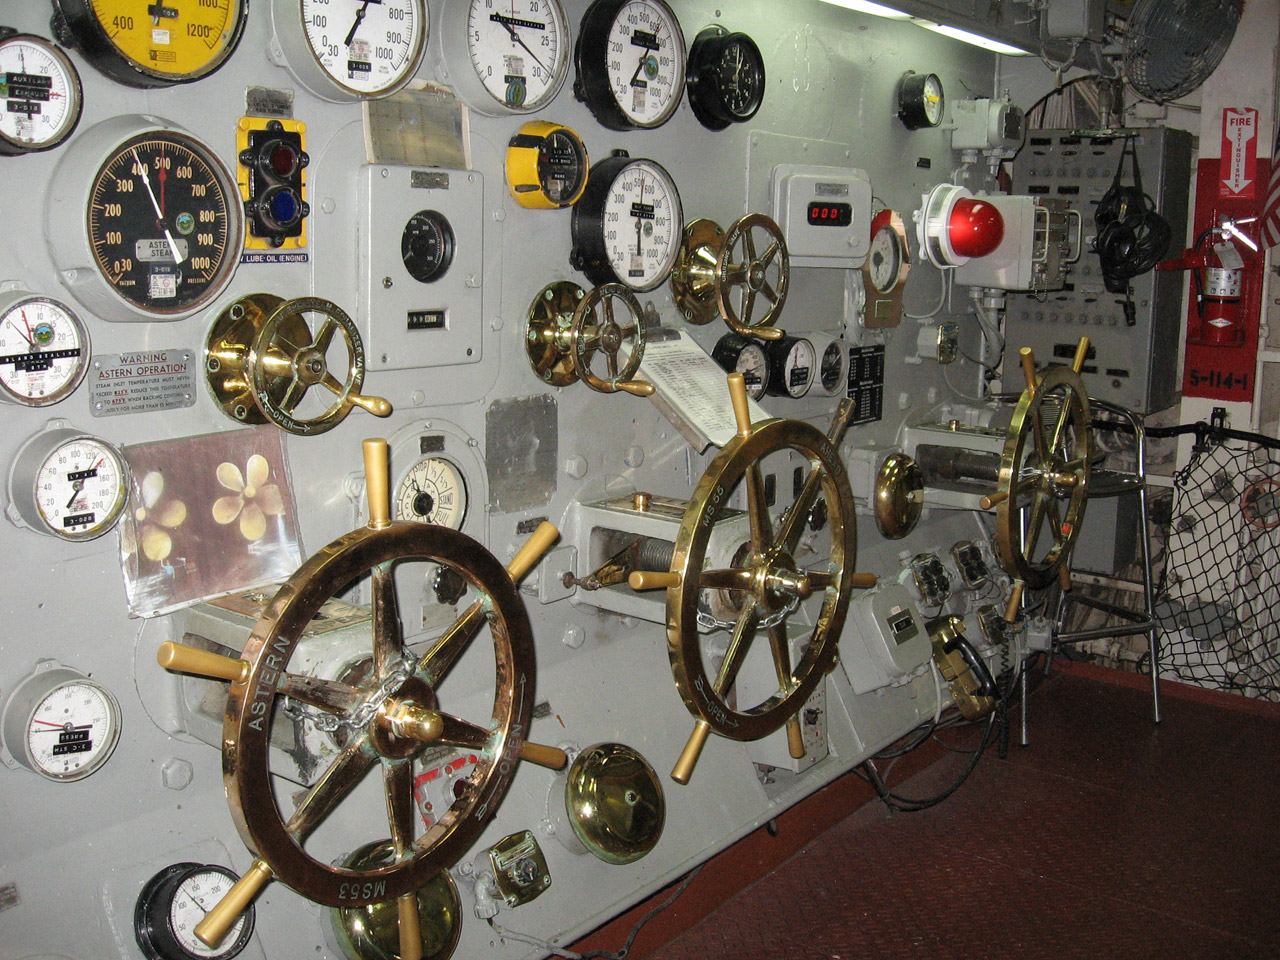 Each "wheel" represents one of the three steam boilers used for power; three men per "wheel station" manned this area 24 hours per day while the ship was moving.